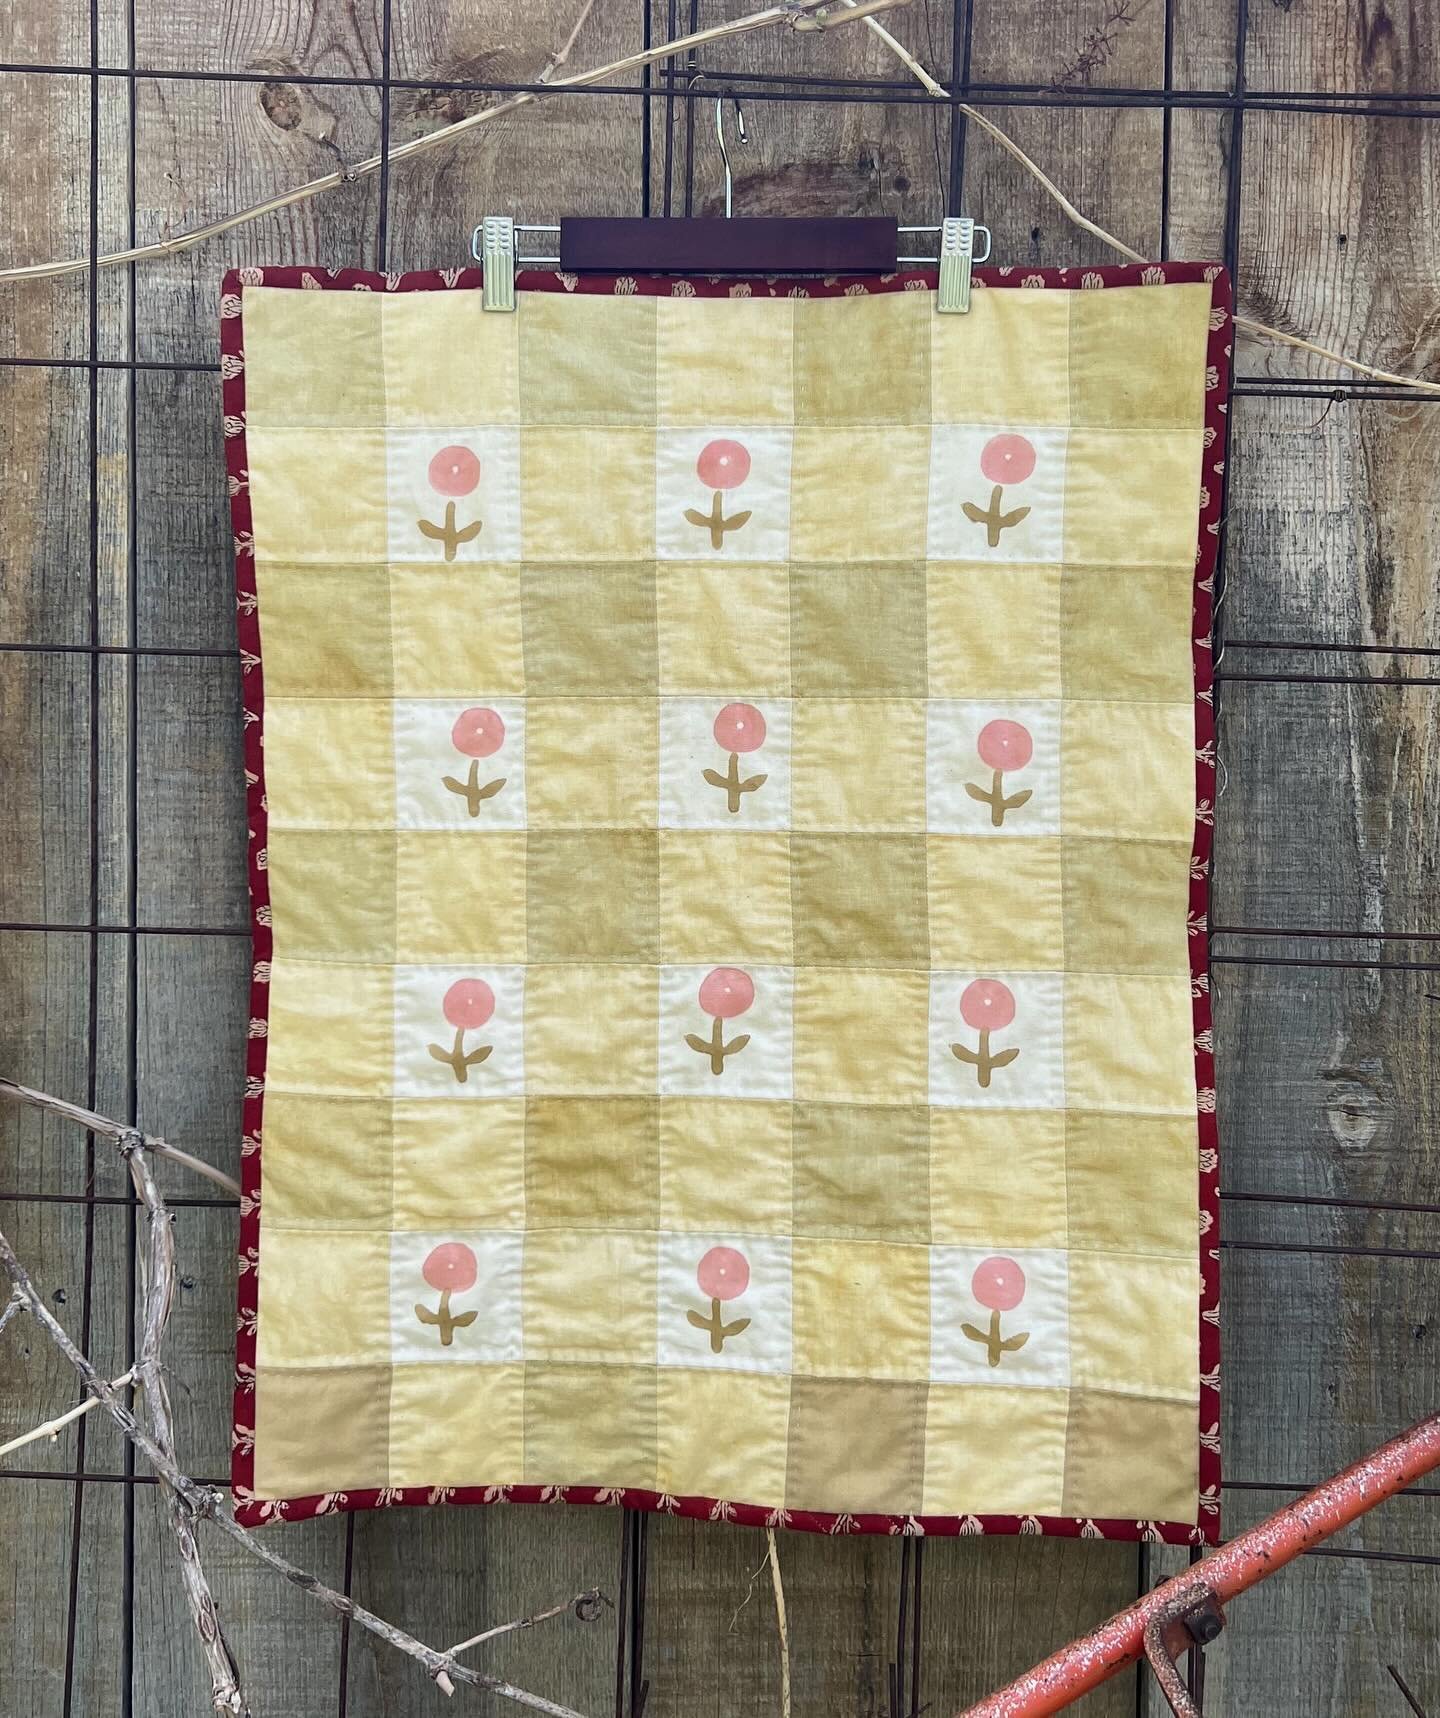 If you&rsquo;re a newsletter subscriber check your inbox for the details regarding the pre-order for this quilt kit. I&rsquo;m so happy to offer this kit which includes everything you need to dye and make the quilt including 12 block printed precut f